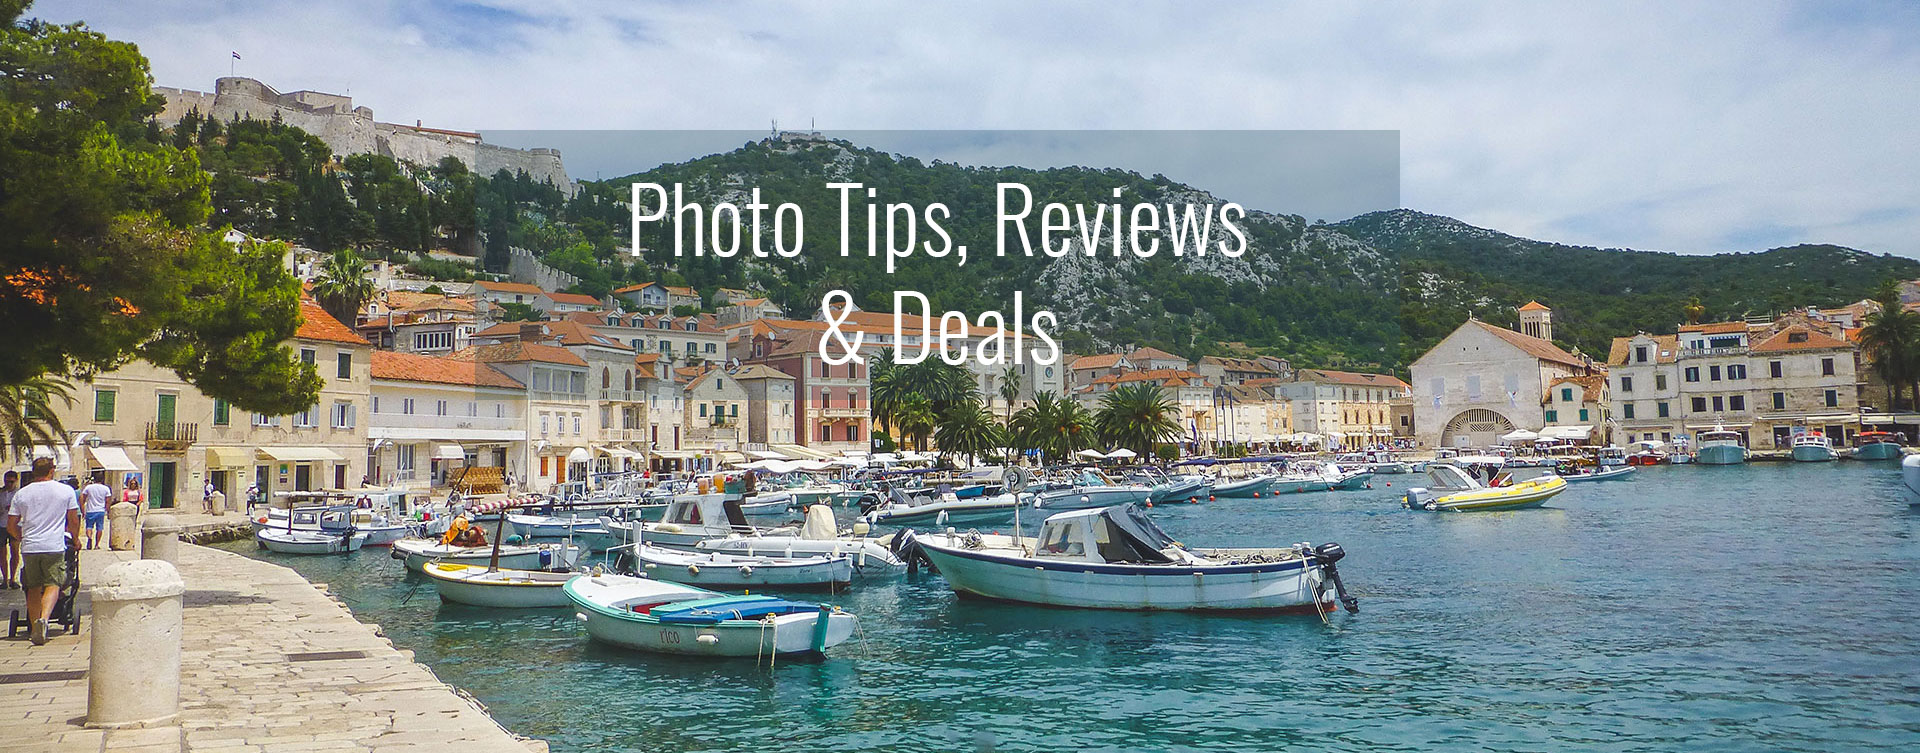 Photo tips, reviews and deals